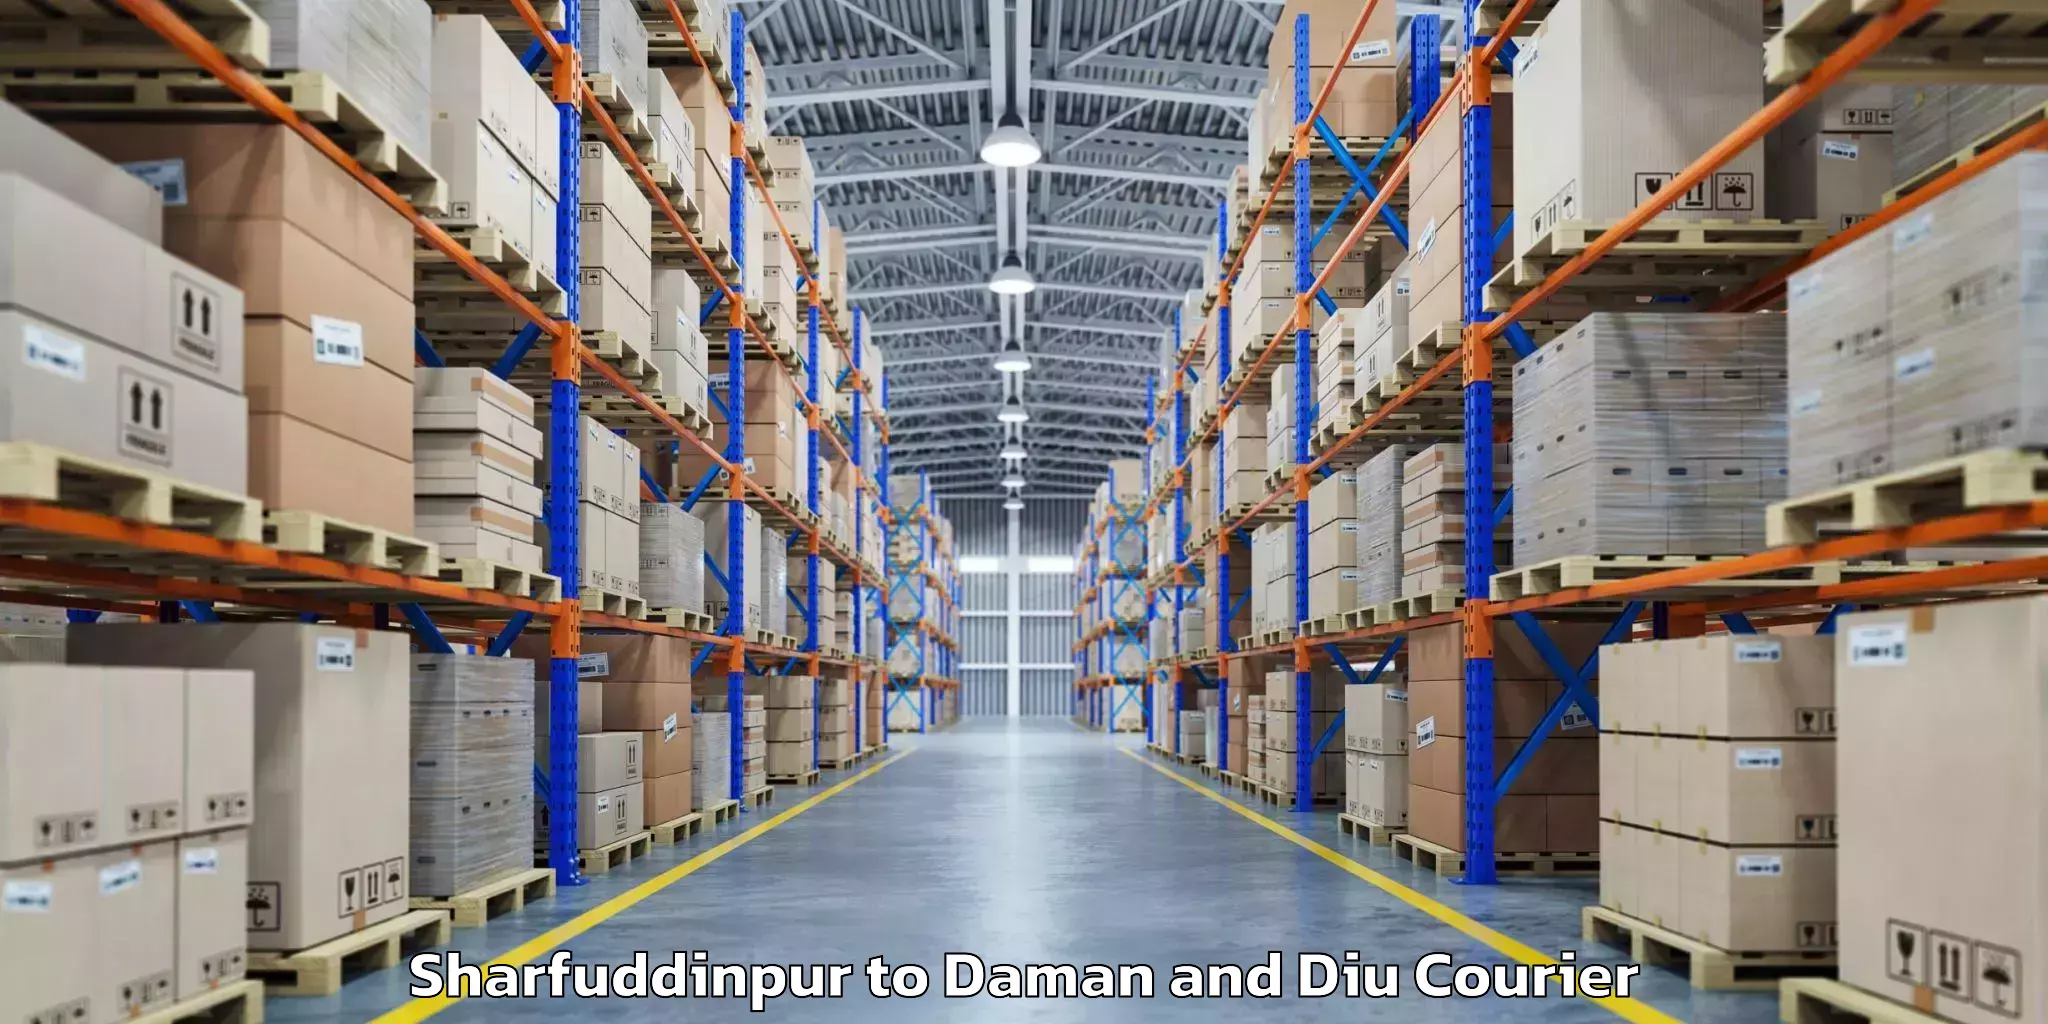 Baggage transport quote Sharfuddinpur to Daman and Diu